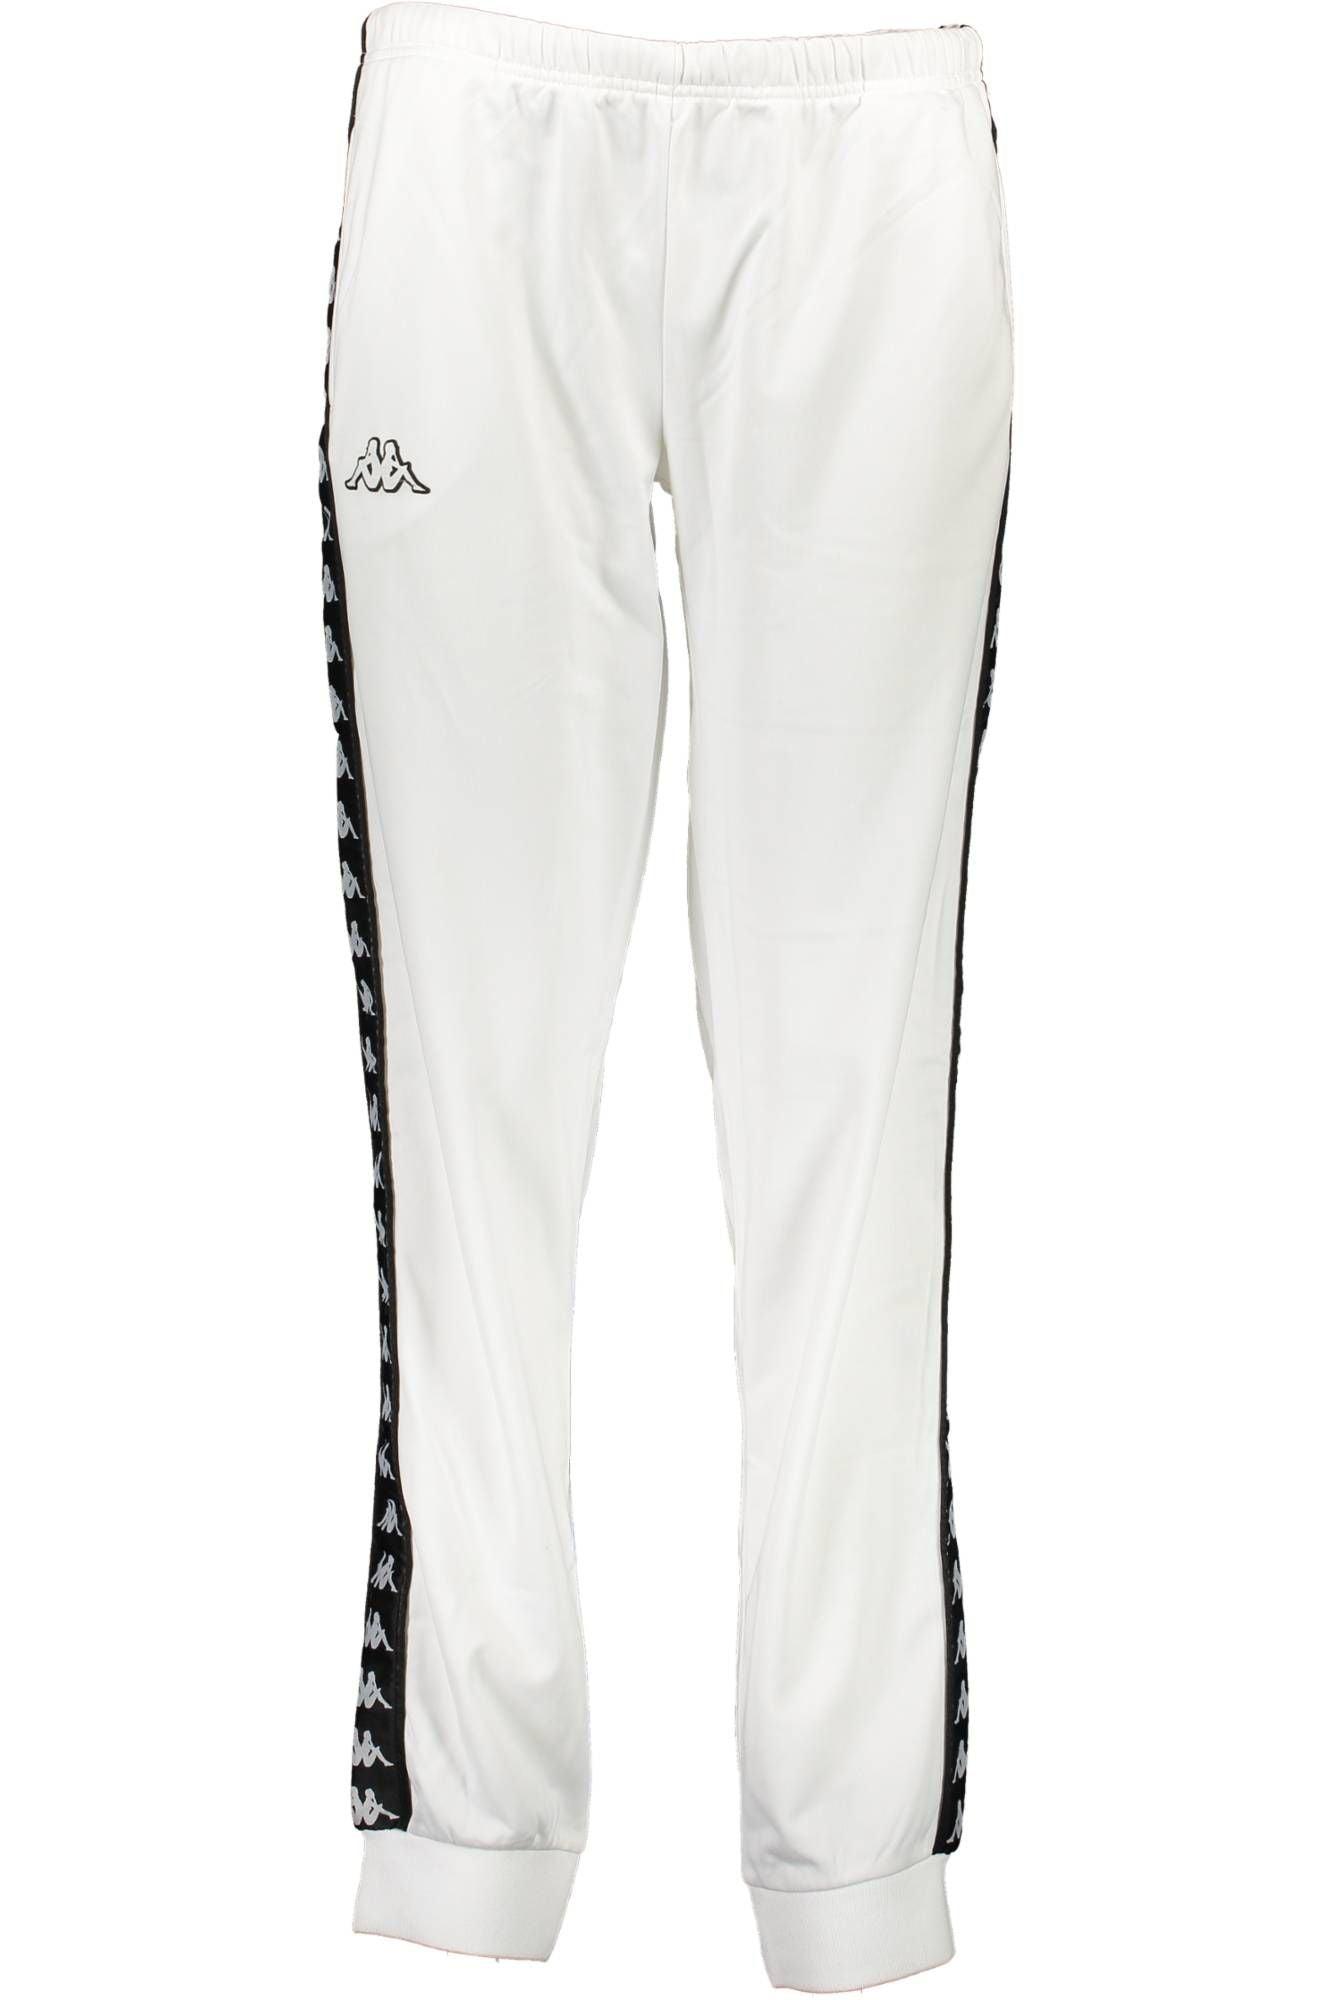 Kappa Polyester Jeans & Pant in White | Lyst